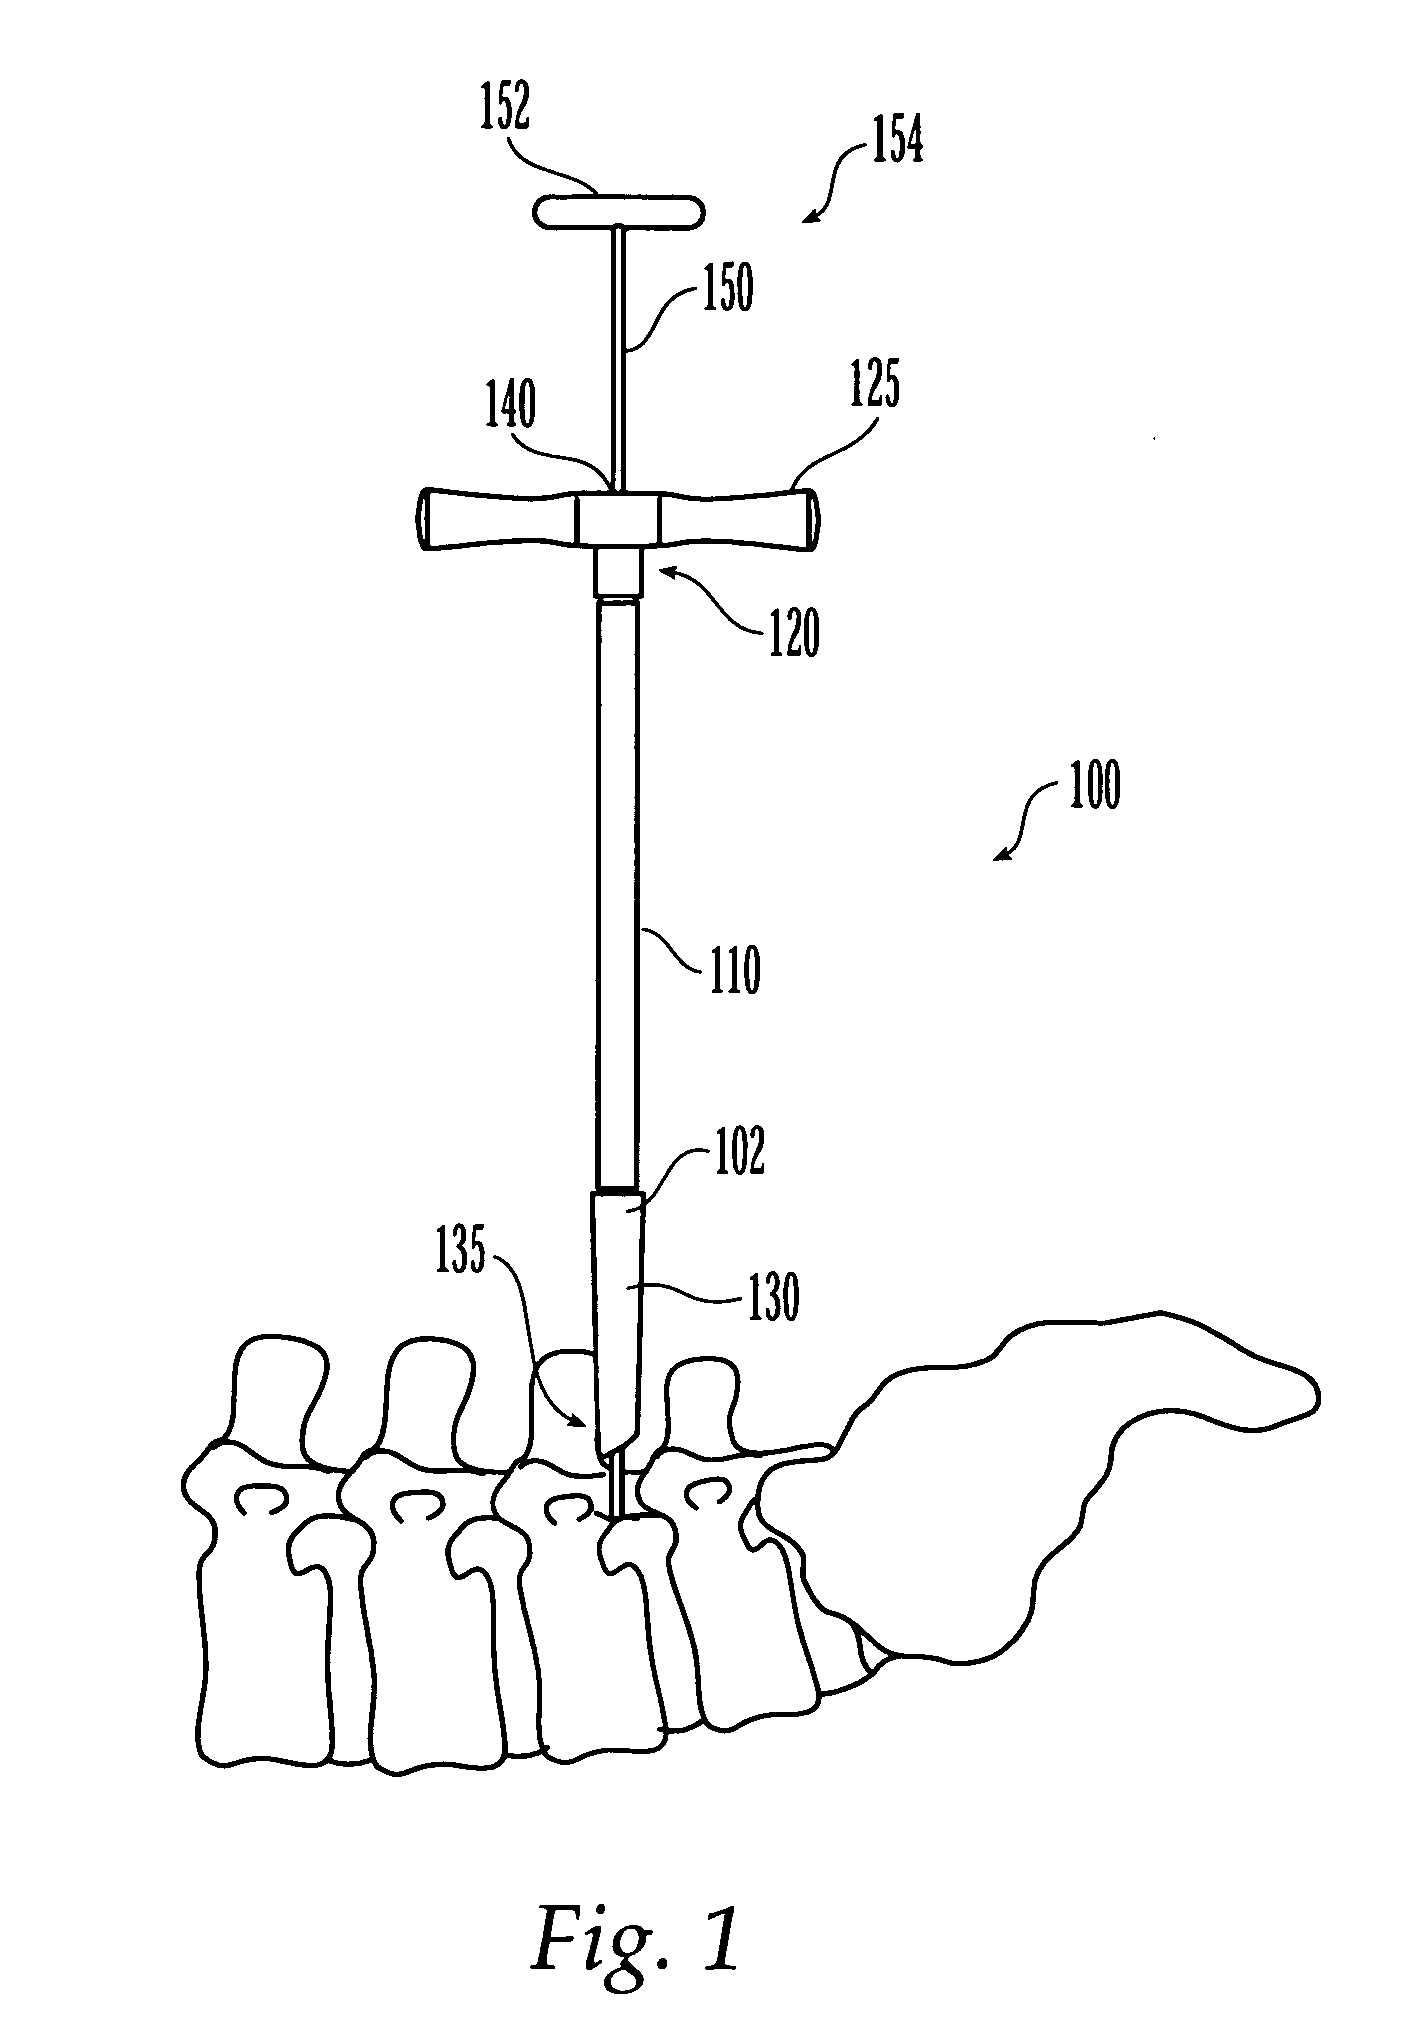 Less invasive surgical system and methods